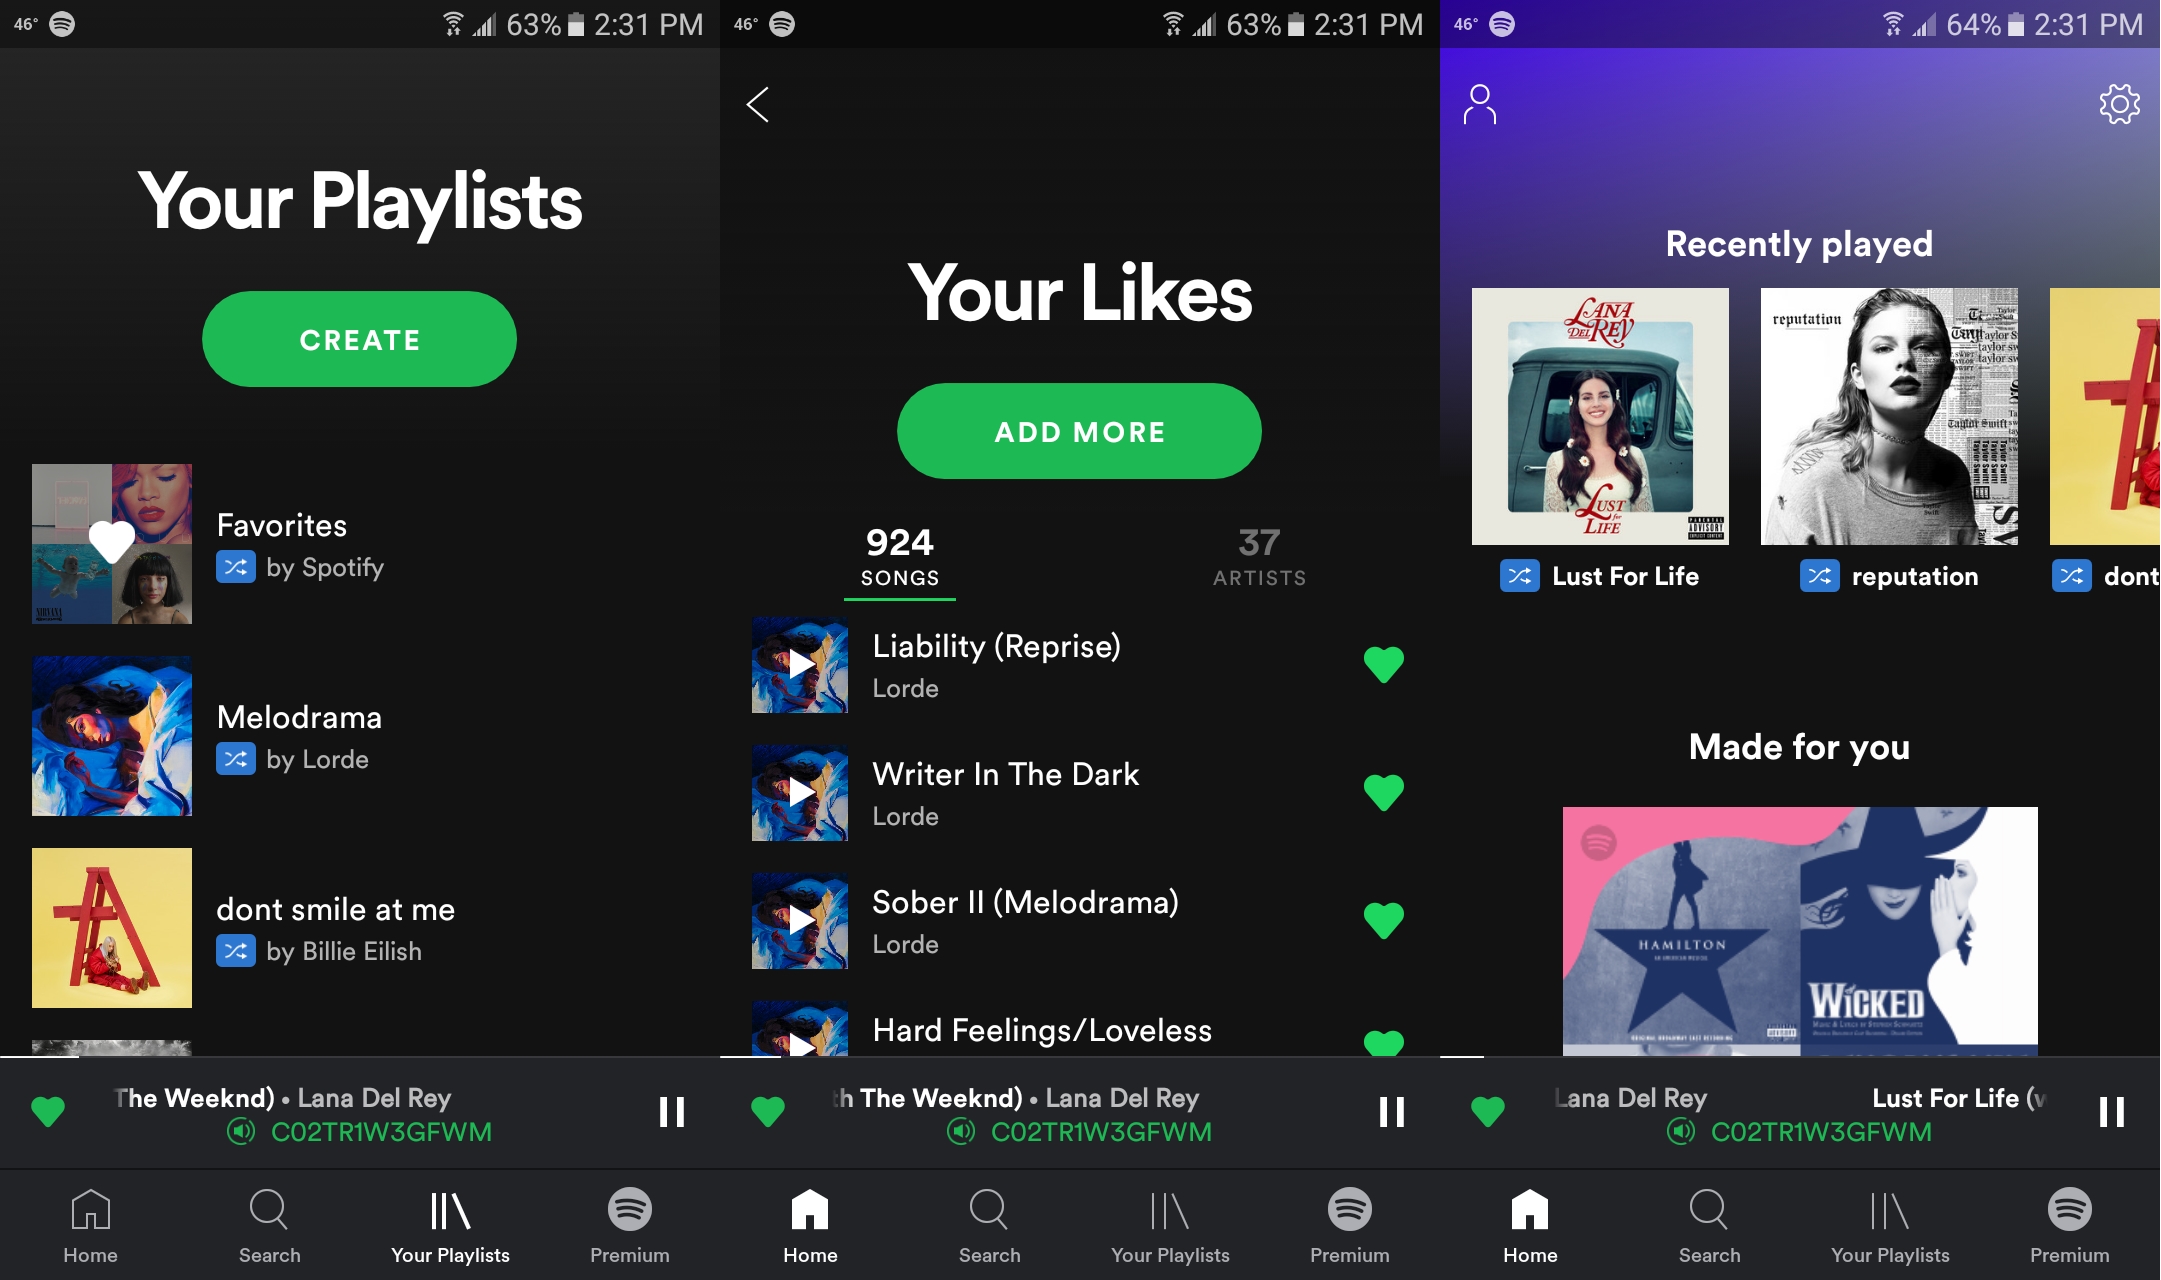 Spotify testing new mobile app with unrestricted playlists